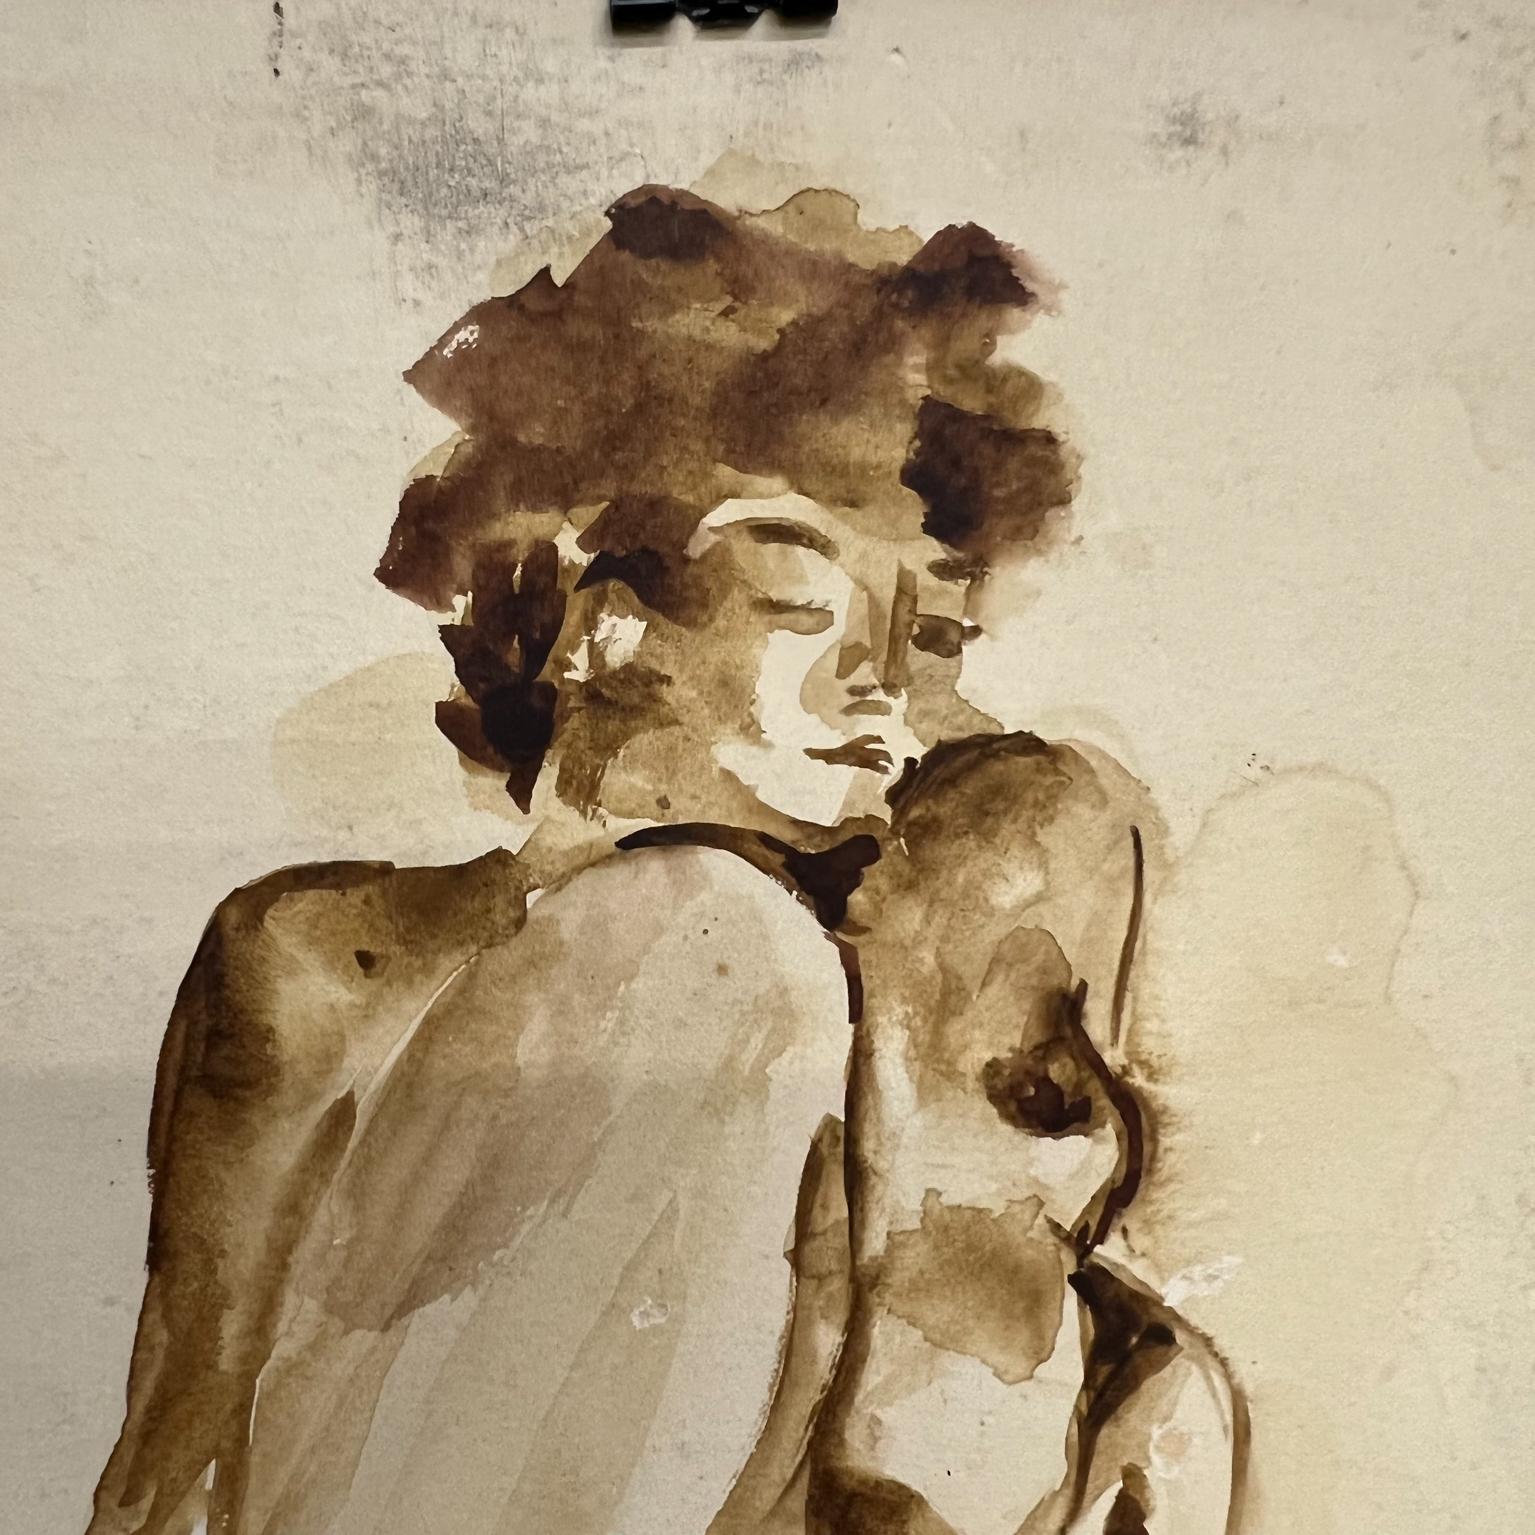 Mid-Century Modern Mid-20th Century Art Watercolor Sketch Signed by Artist Fleming For Sale